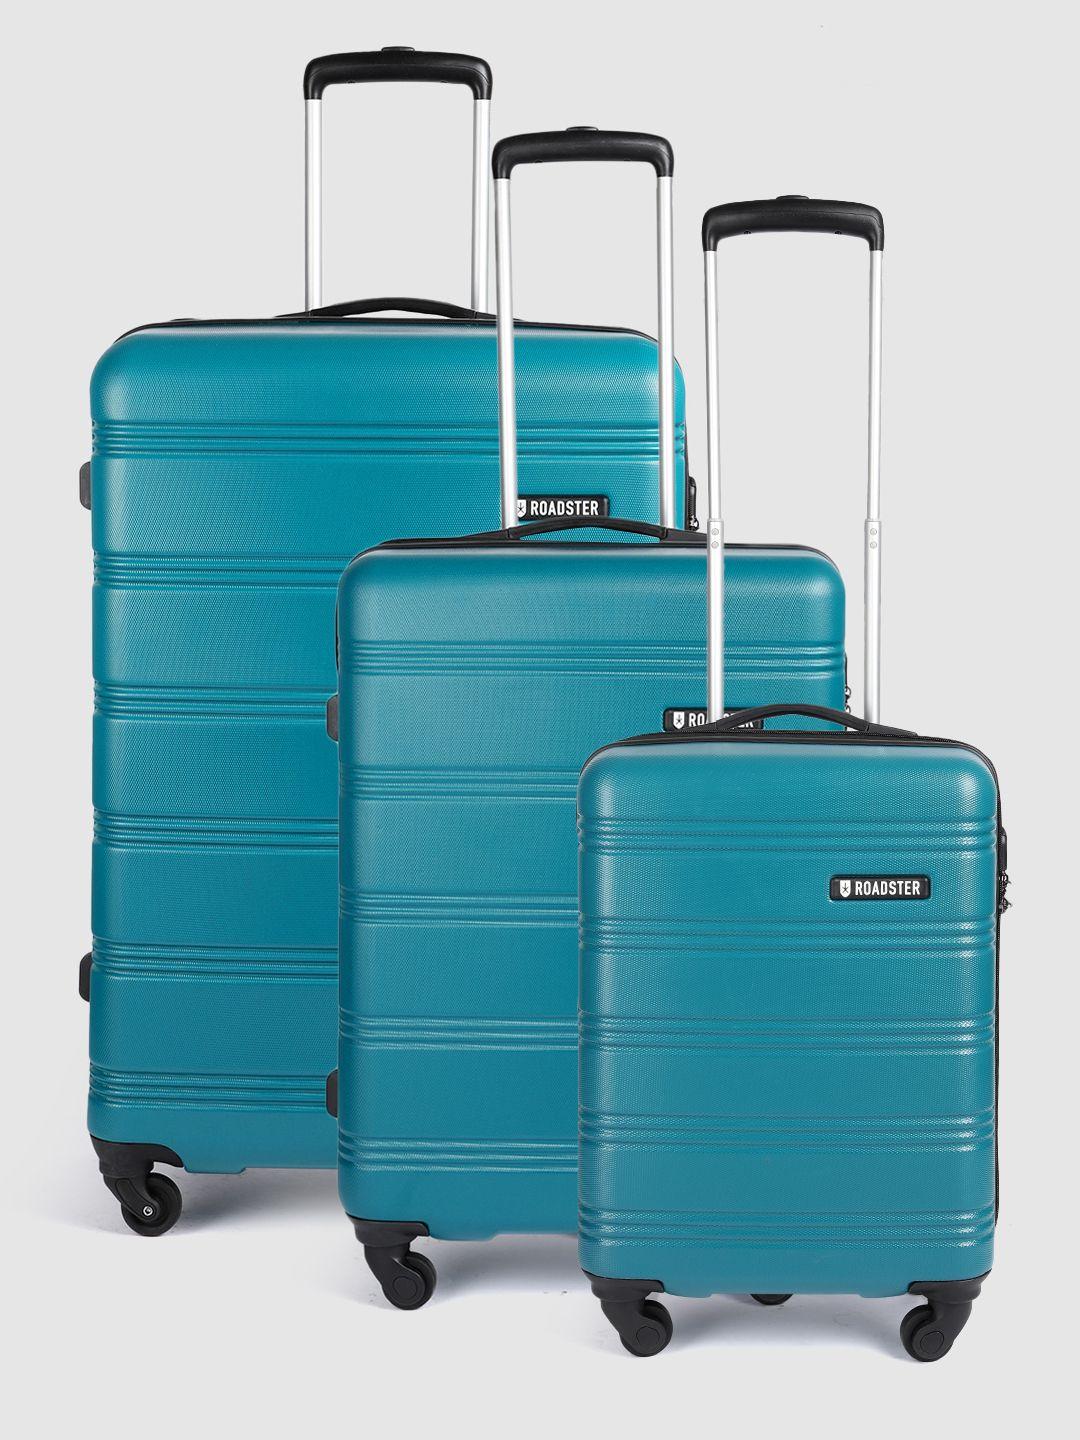 roadster set of 3 textured hard-sided trolley bags